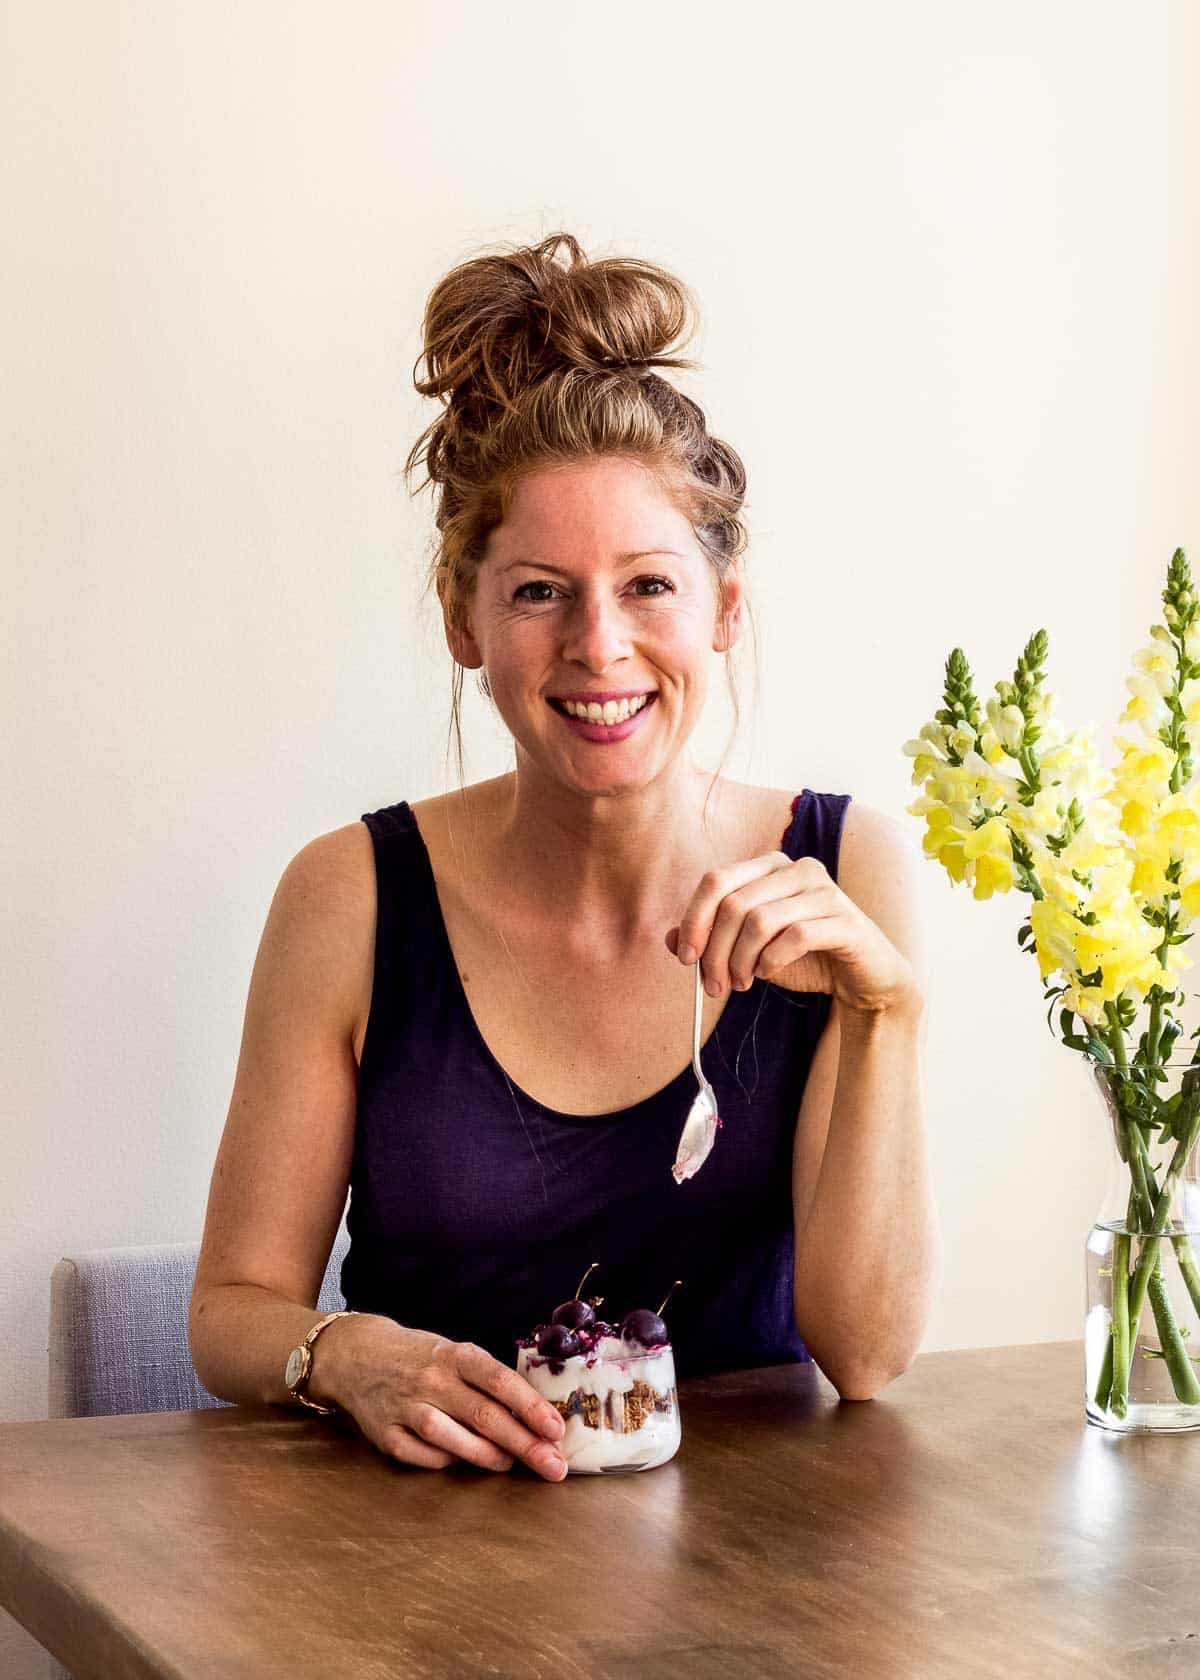 Elizabeth Emery of Vancouver with Love sitting at a kitchen table eating a vegan dessert.